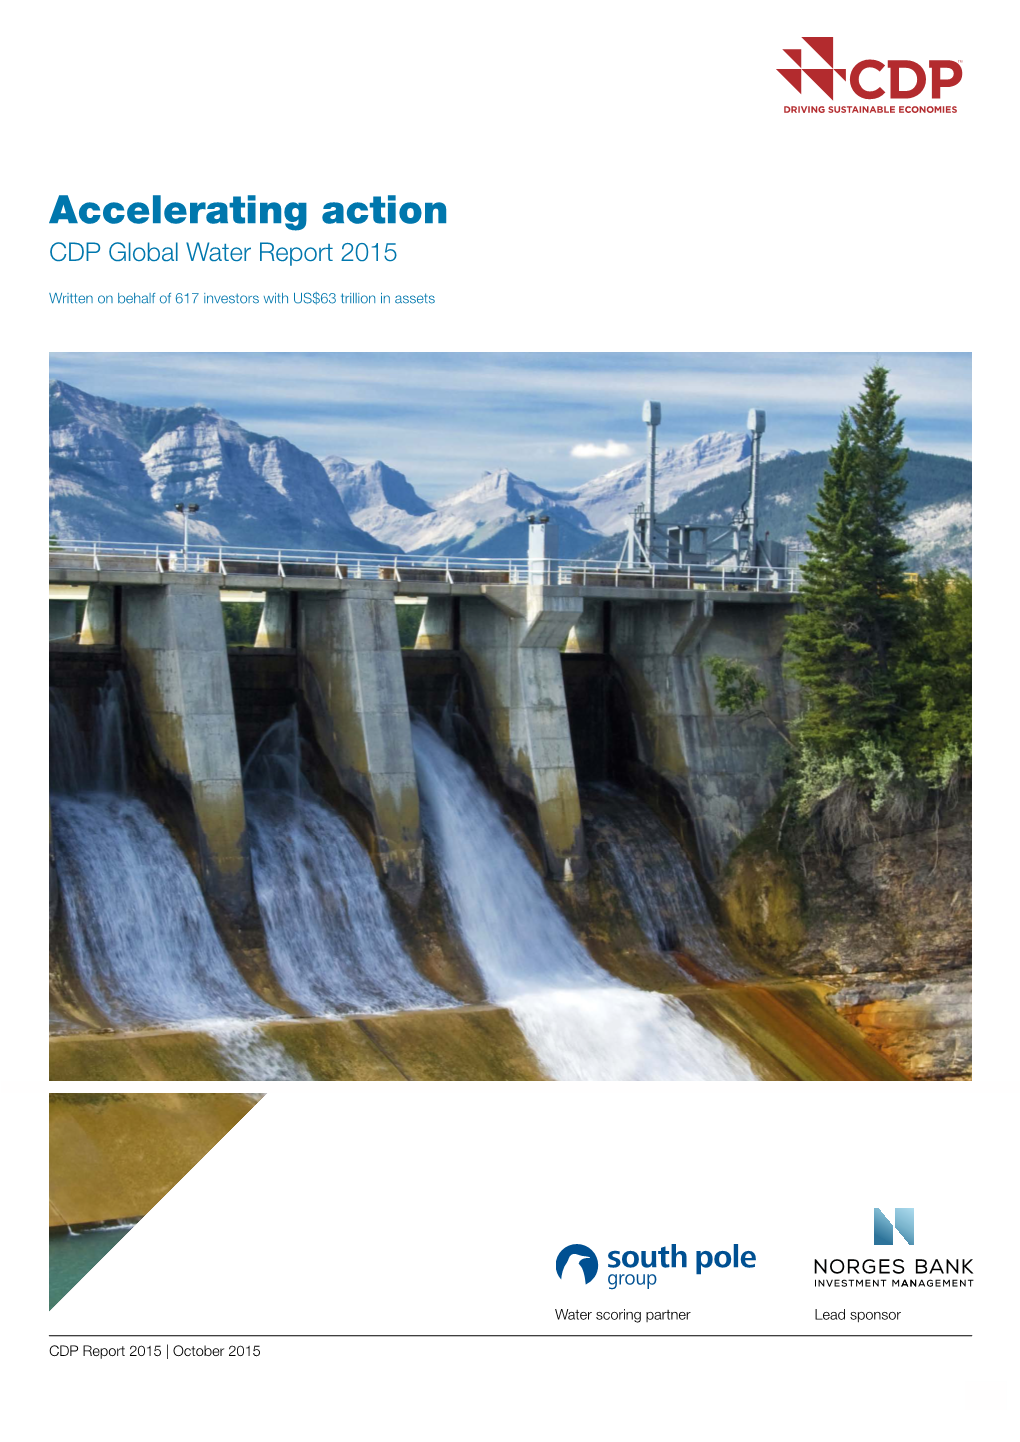 Accelerating Action CDP Global Water Report 2015